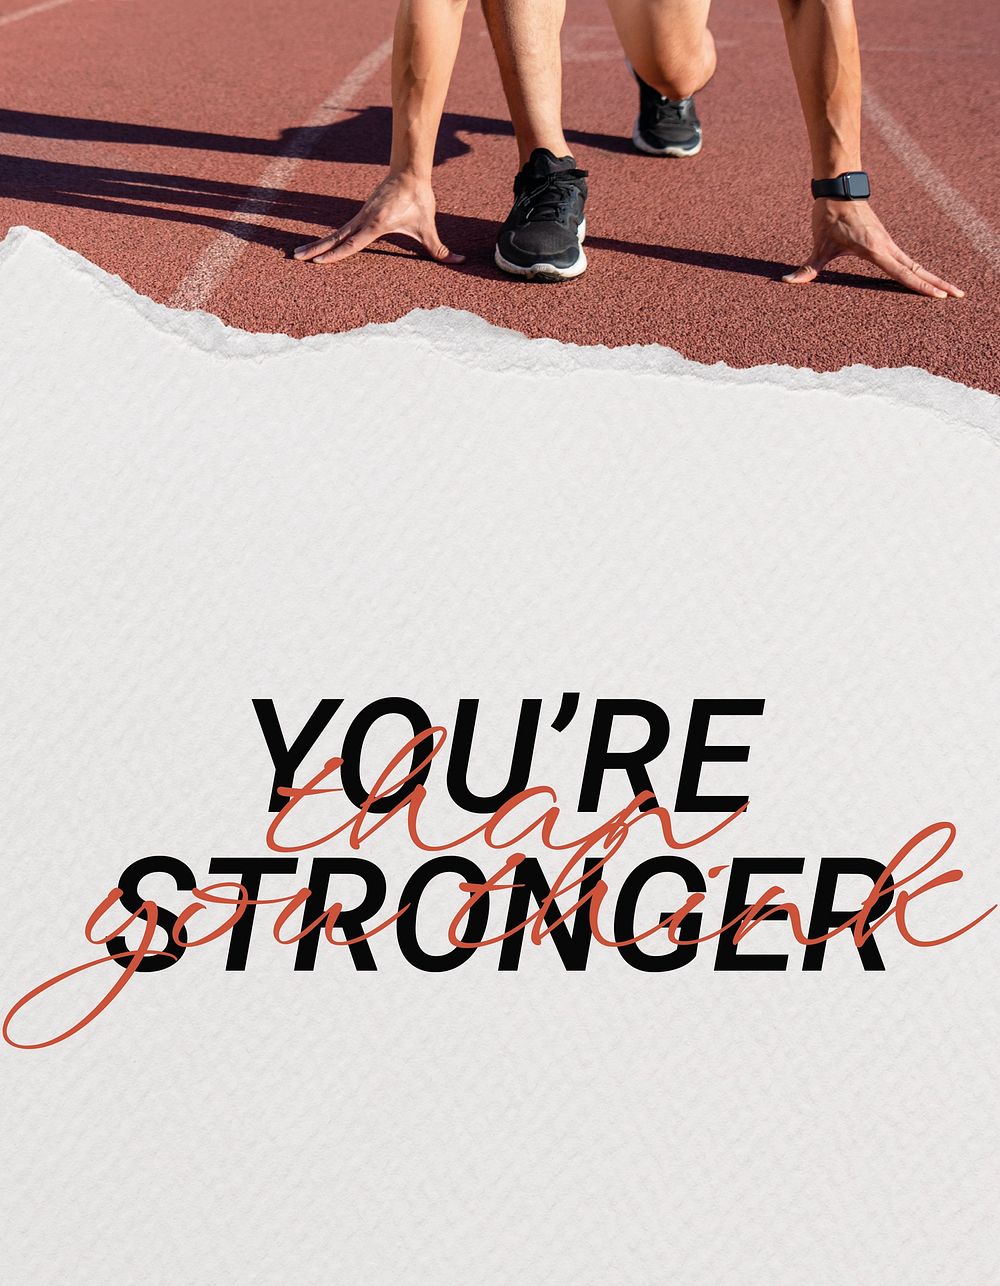 You're stronger flyer template, inspirational sports quote psd